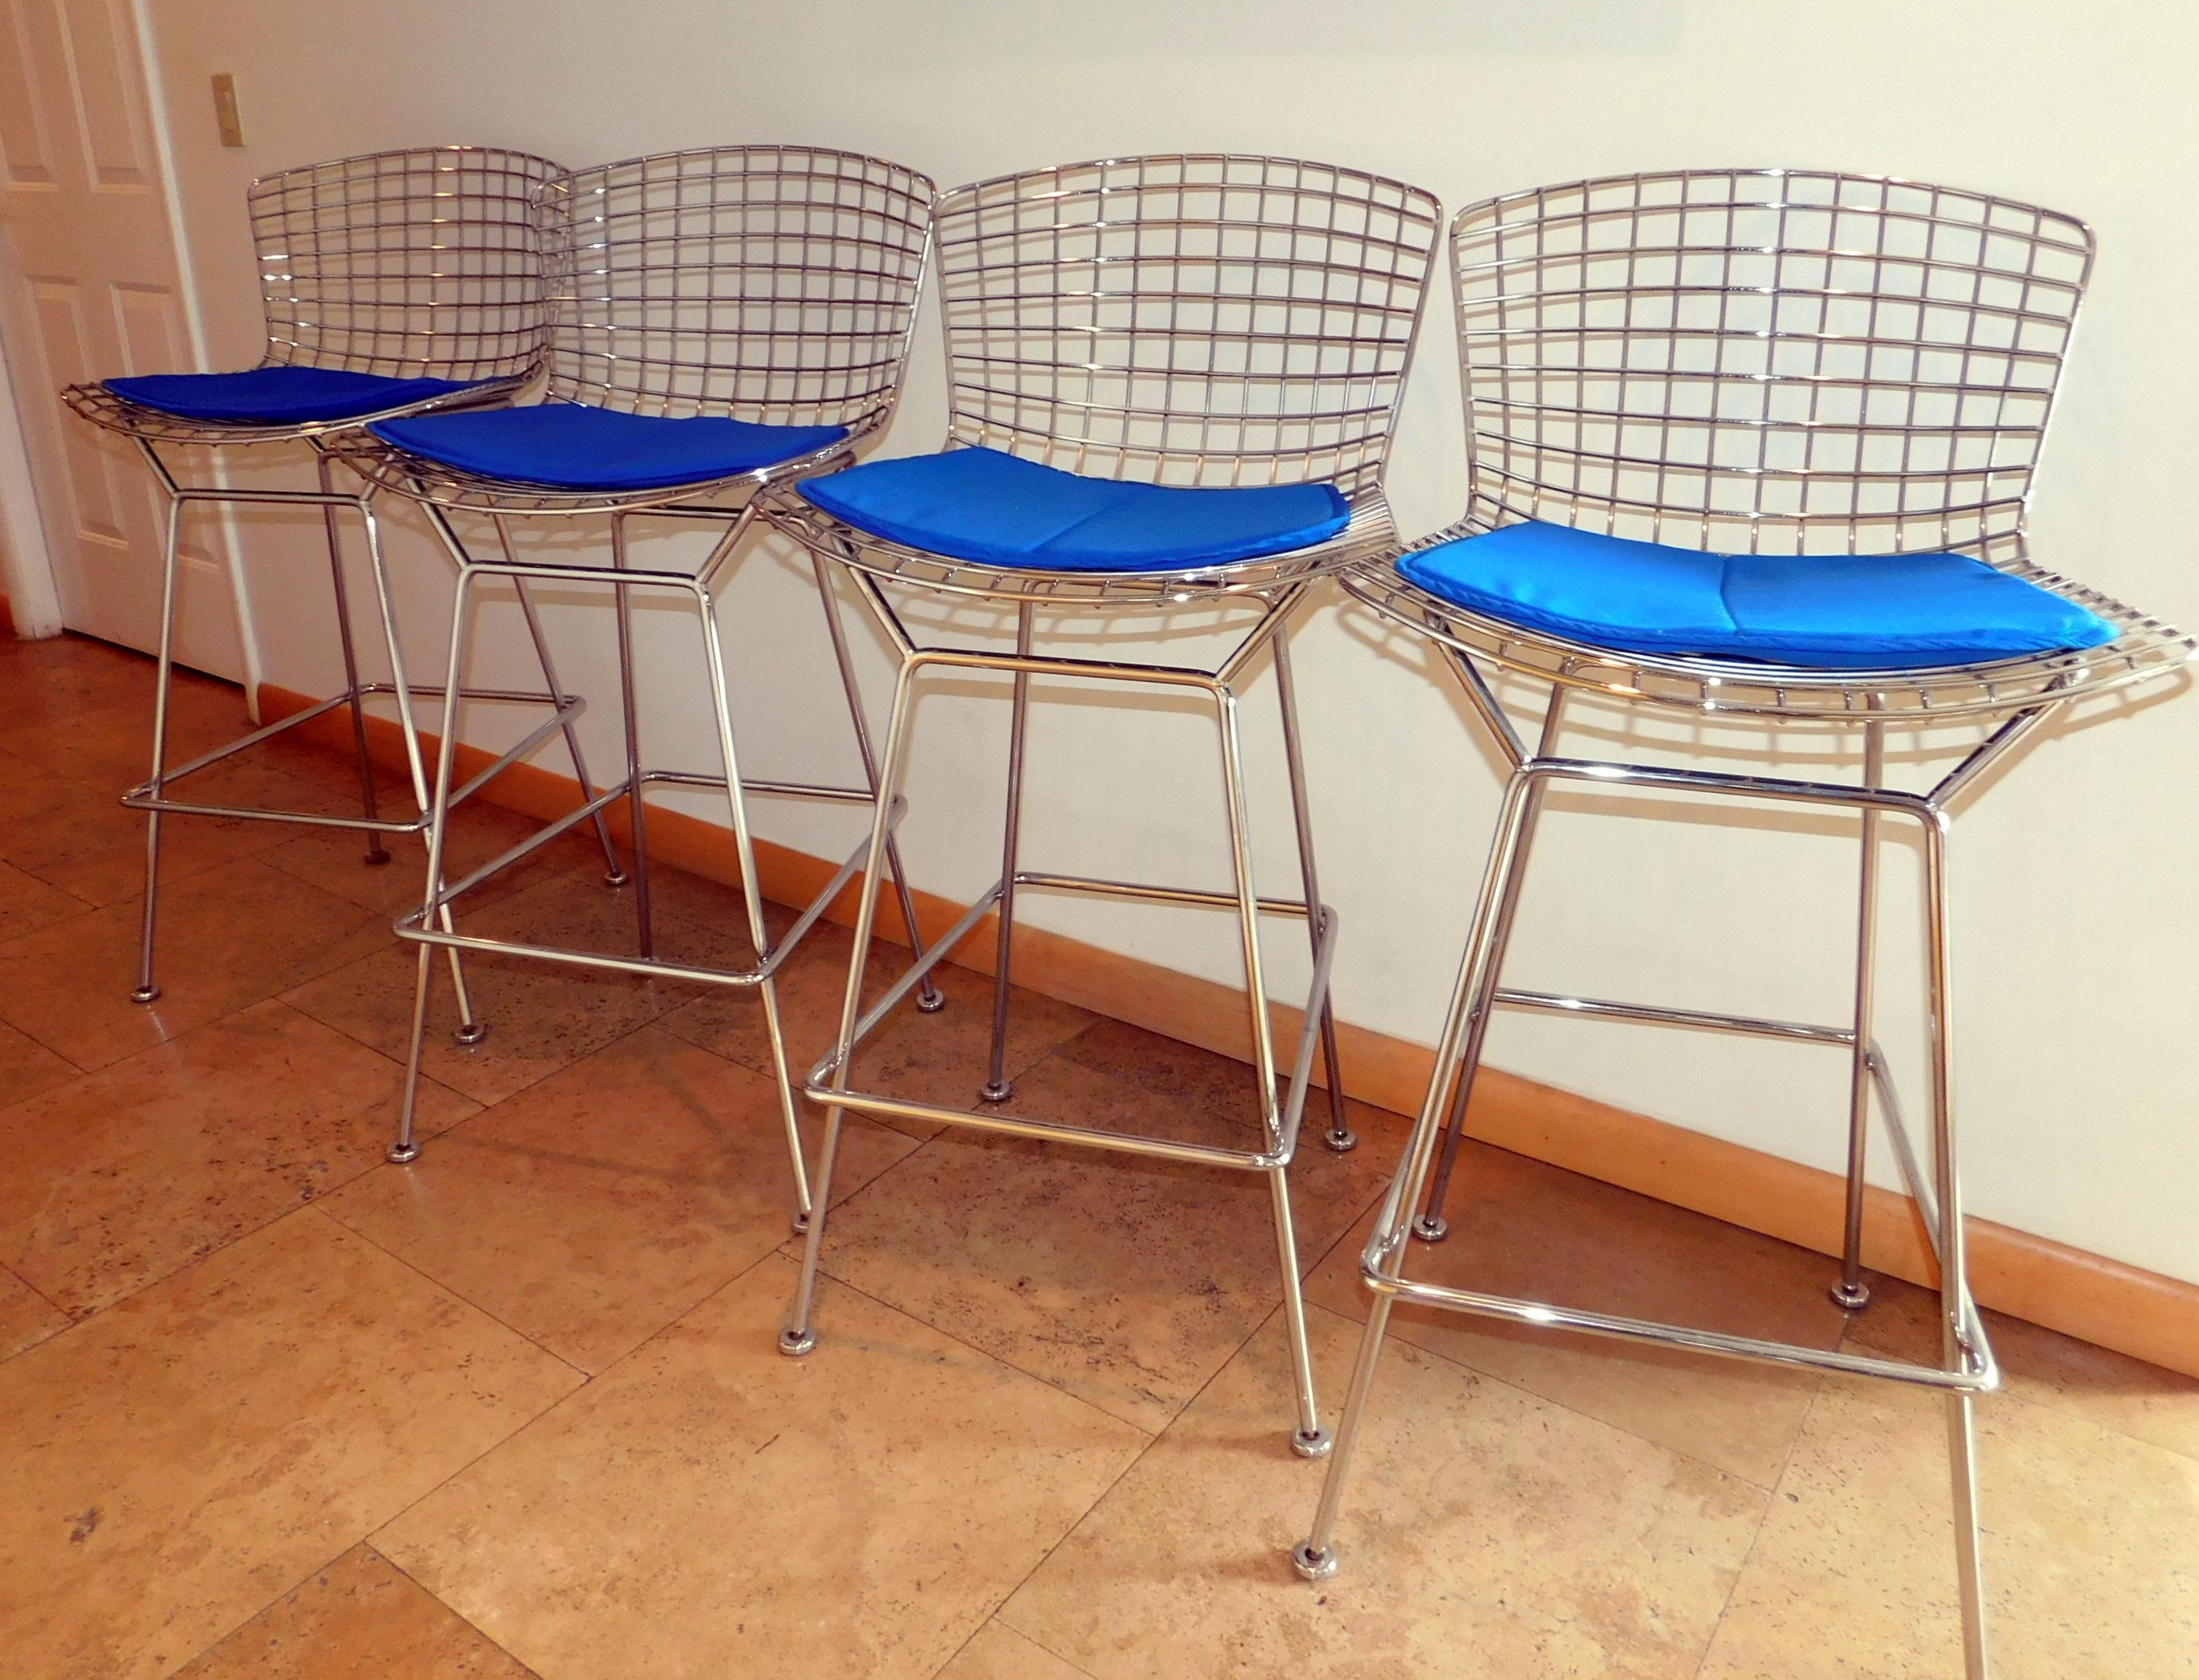 Original modern chrome wire bar stools in excellent condition. Made by Knoll International in the US, circa 1970-1980.
Iconic modern design. New seat pads were recently made in bright blue that are very similar to the original pads. 
Measures: 29